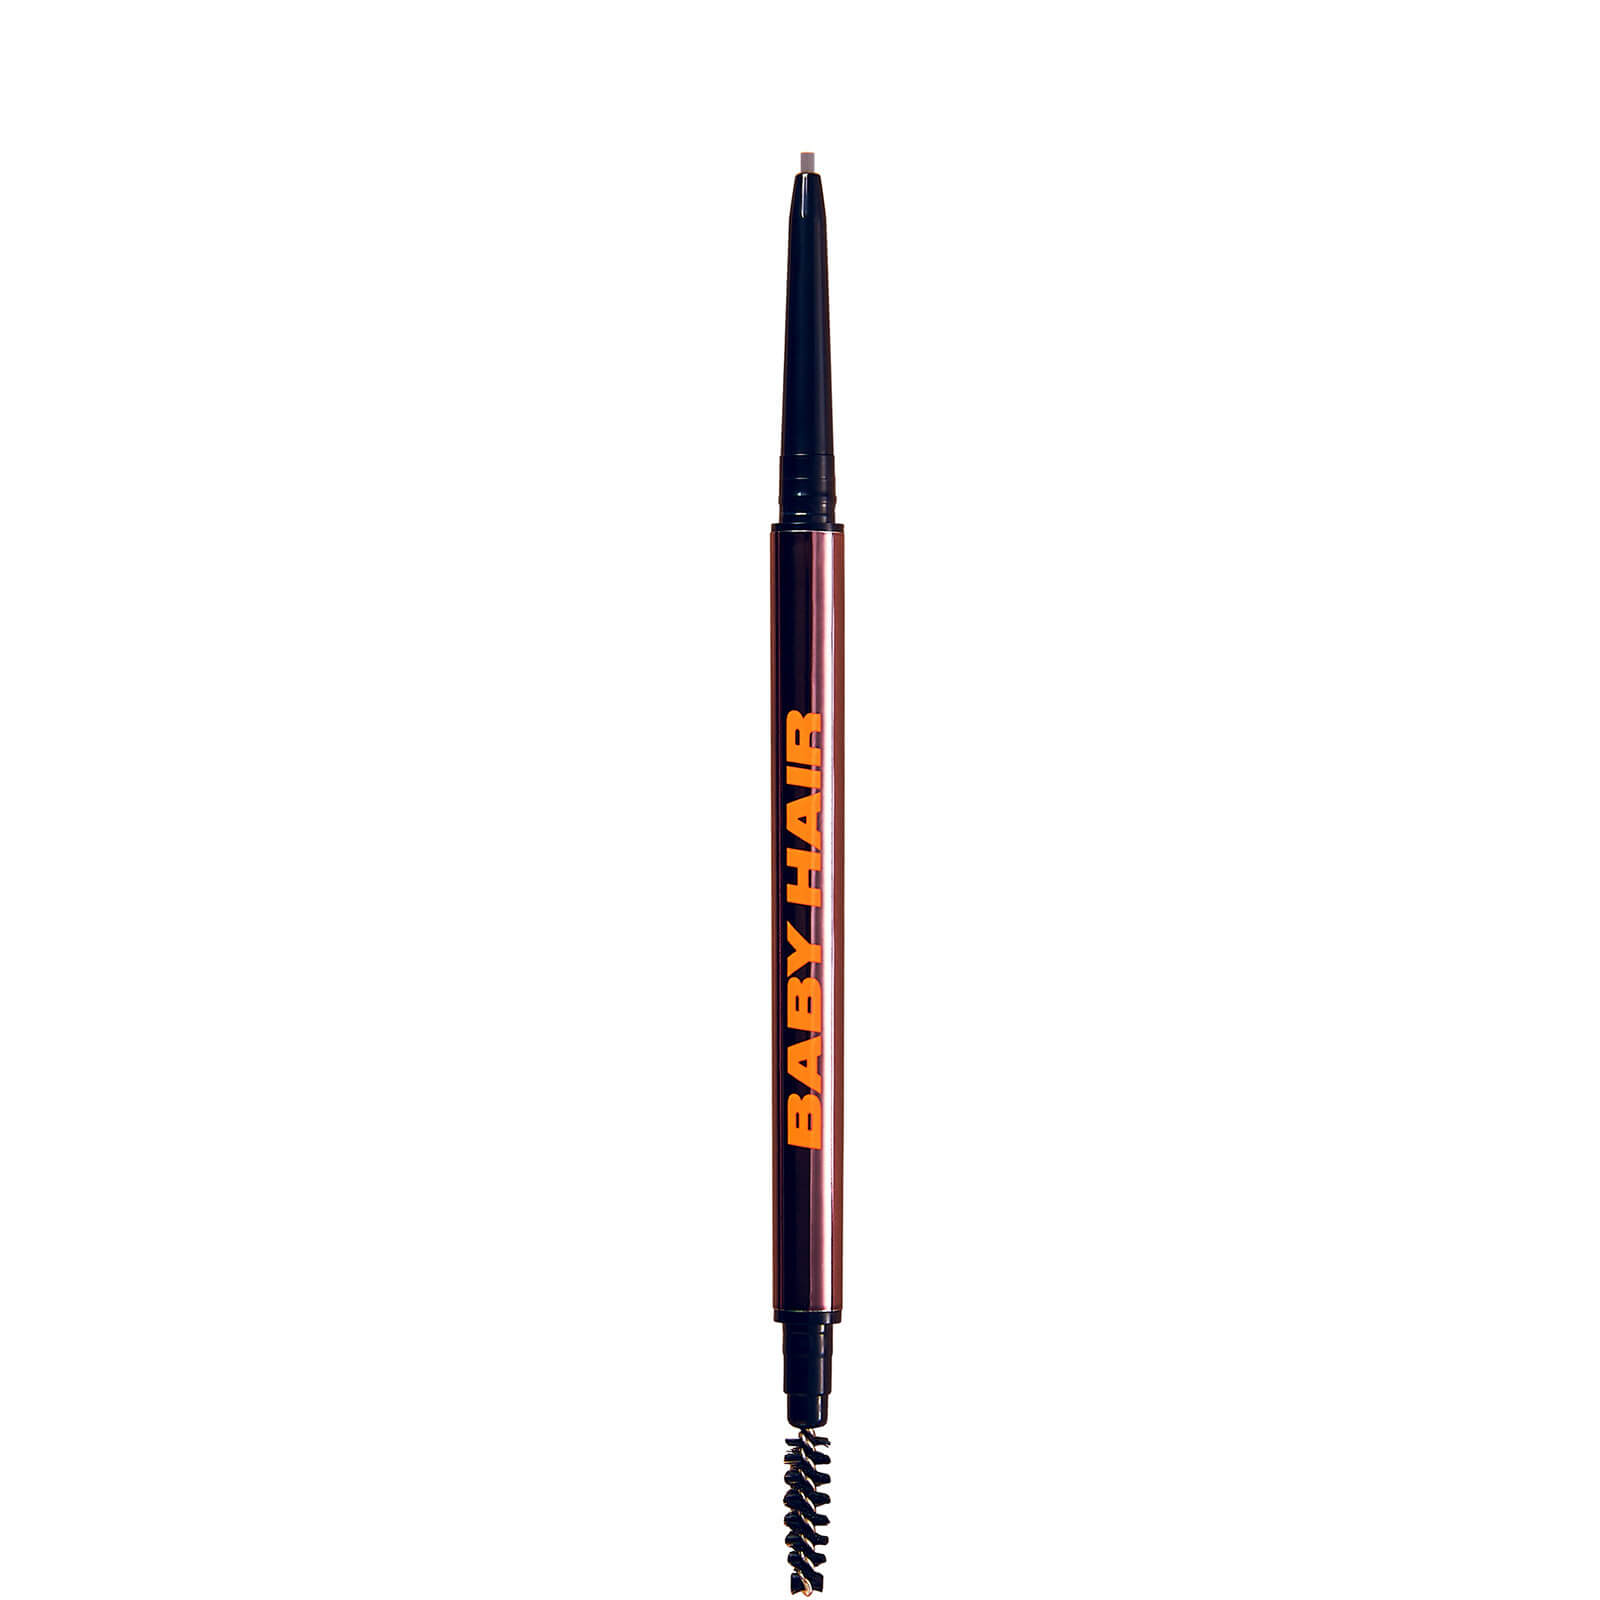 Image of UOMA Beauty Brow Fro Baby Hair Brow Pencil 5ml (Various Shades) - 2